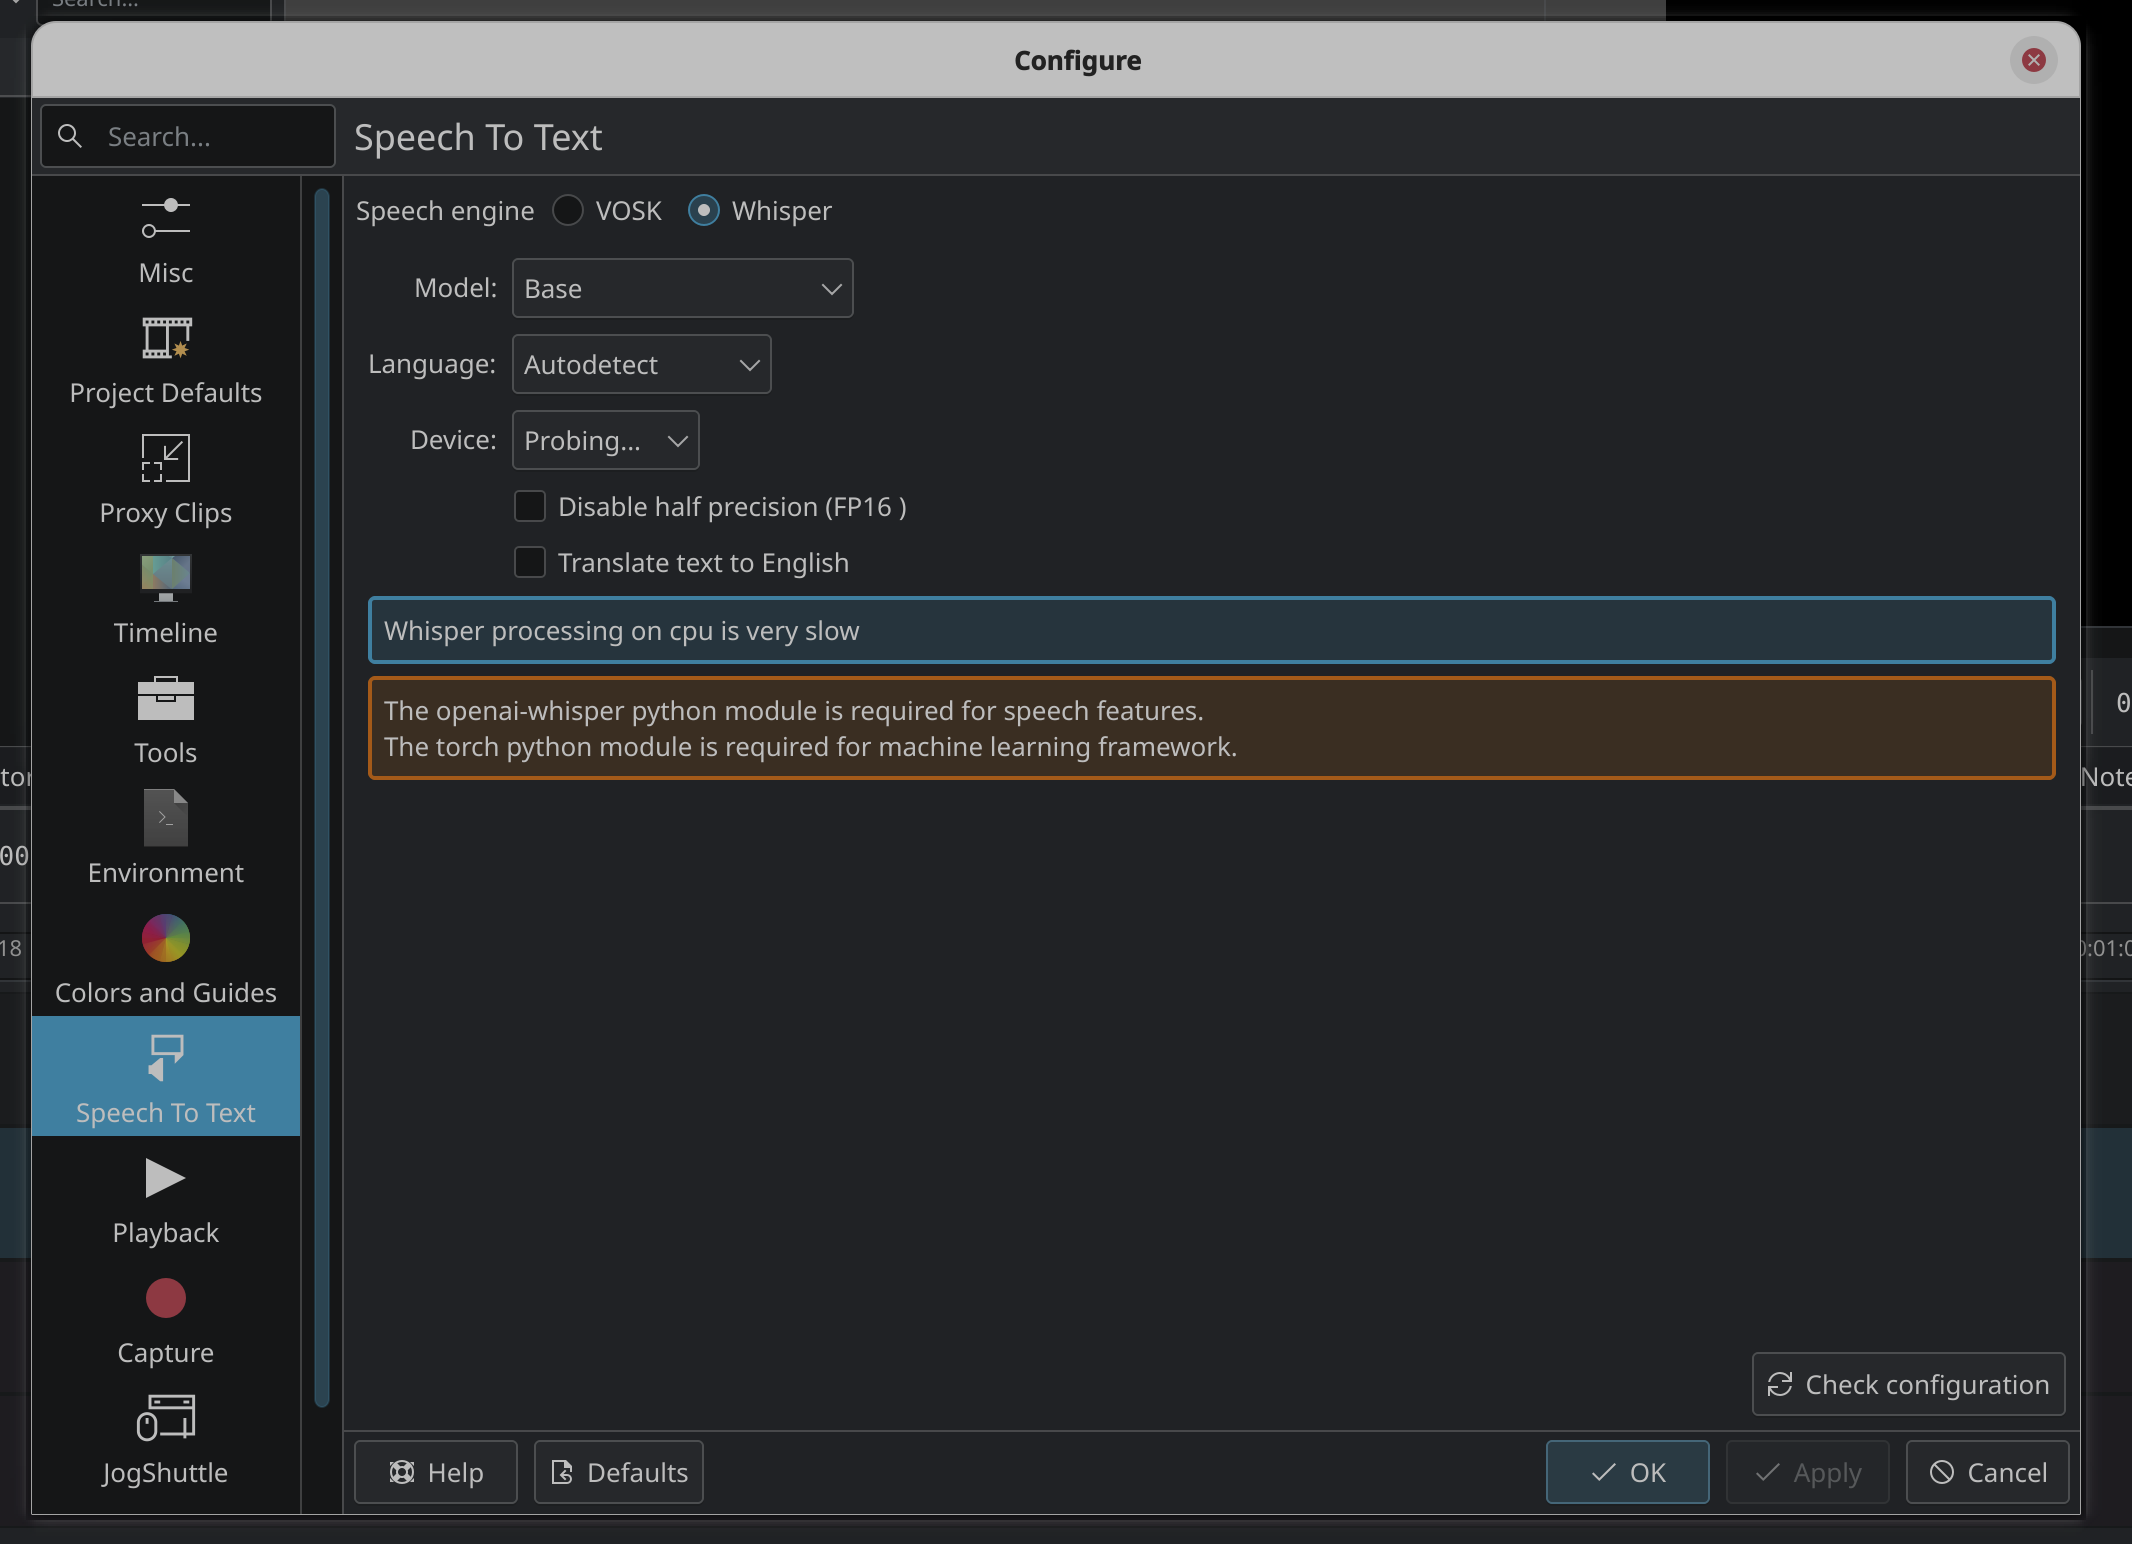 The "Speech To Text" system dialog in Kdenlive 24.02.1.

Several options are displayed, but a warning message states "The openai-whisper python module is required for speech features." Another line in the same warning says "the torch python module is required for machine learning framework." There is no option to attempt to repair the missing features.